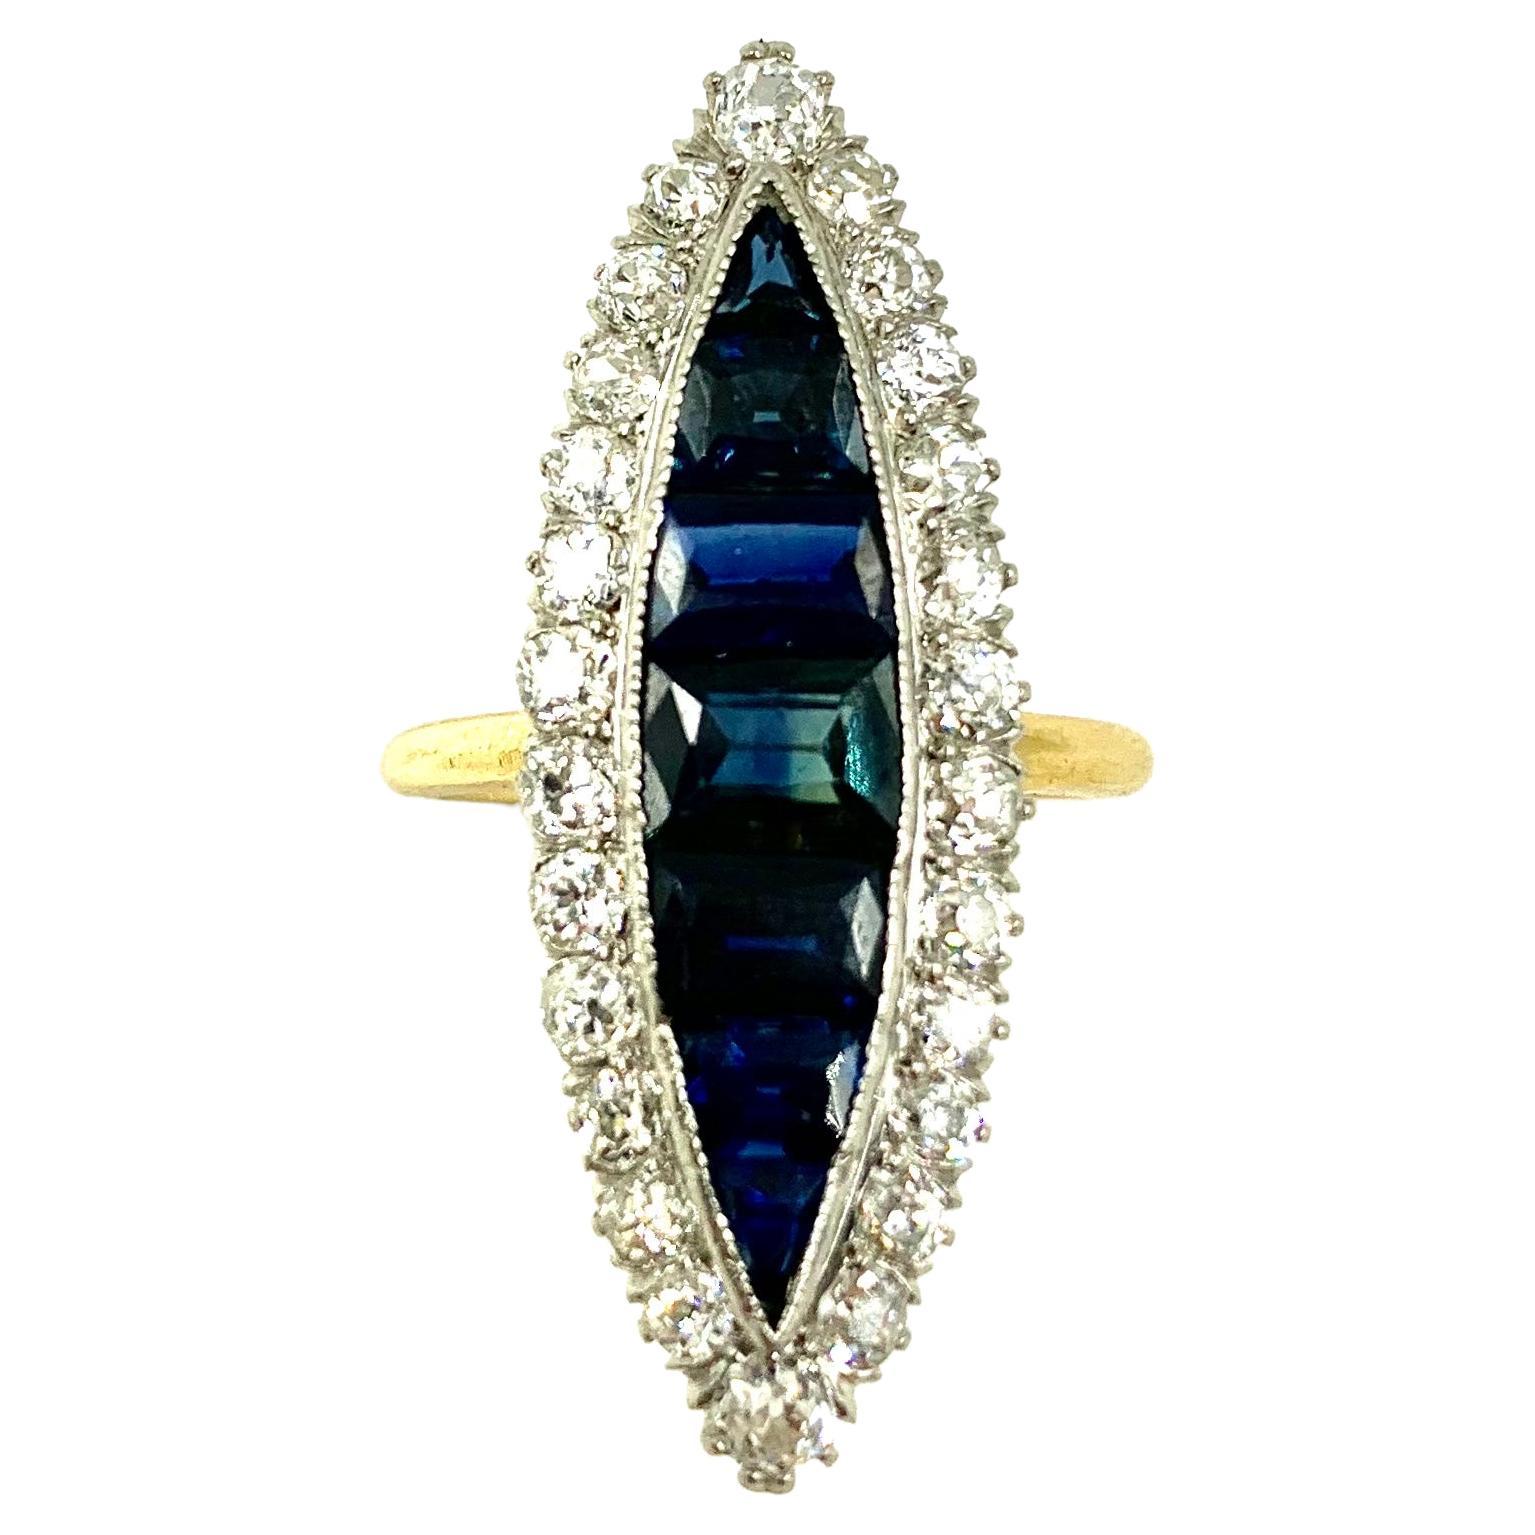 Large Antique Edwardian Diamond, Invisibly Set Sapphire 18k Gold Navette Ring